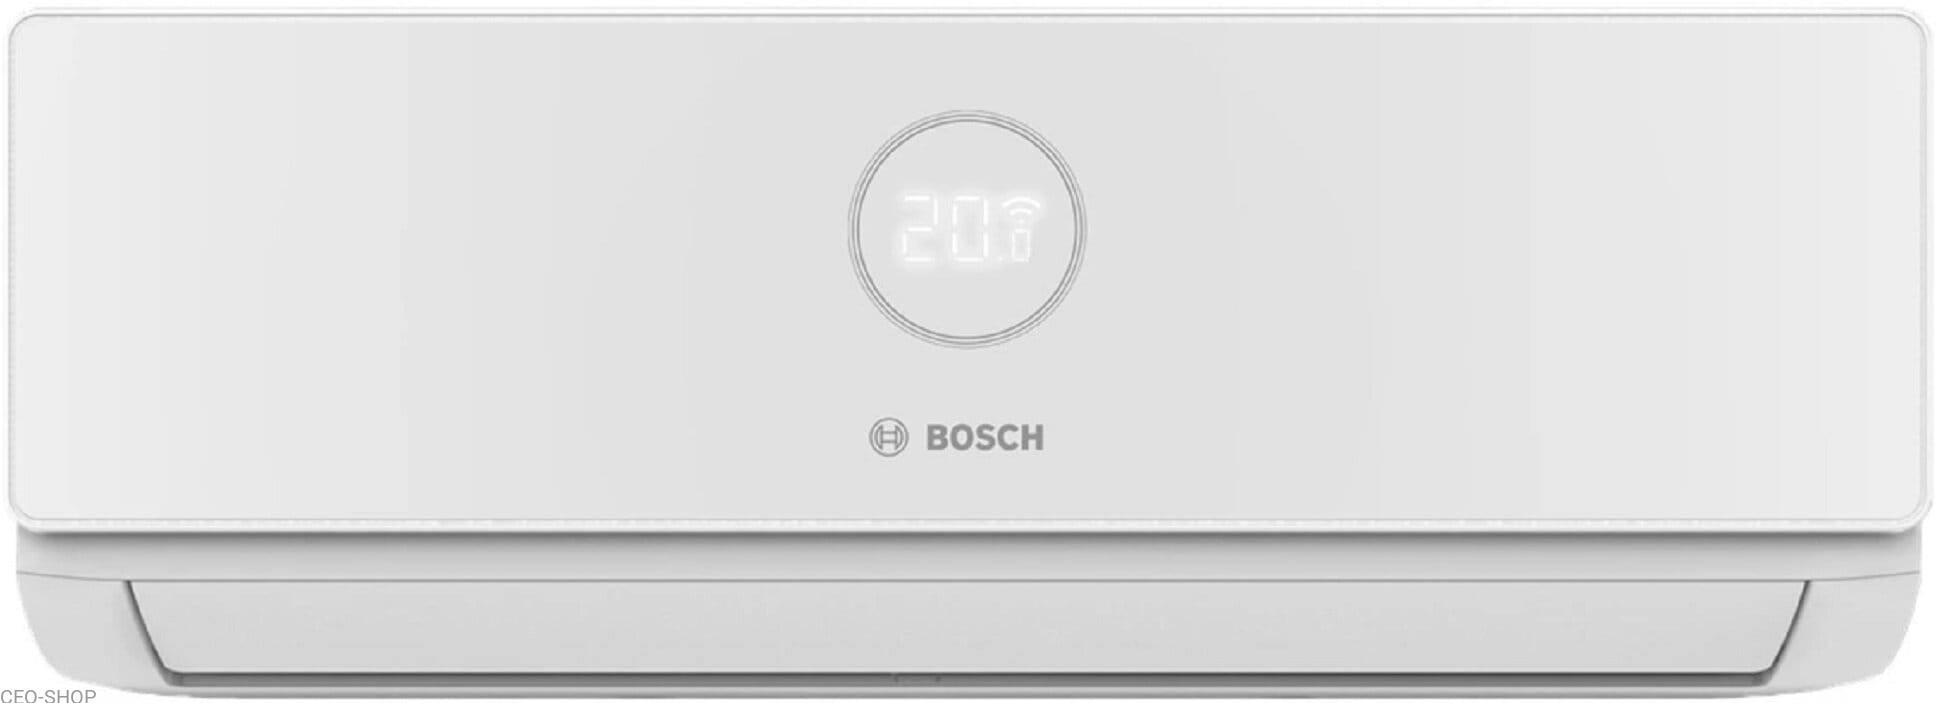 BOSCH Climate 3000i 5.3 kW air conditioner